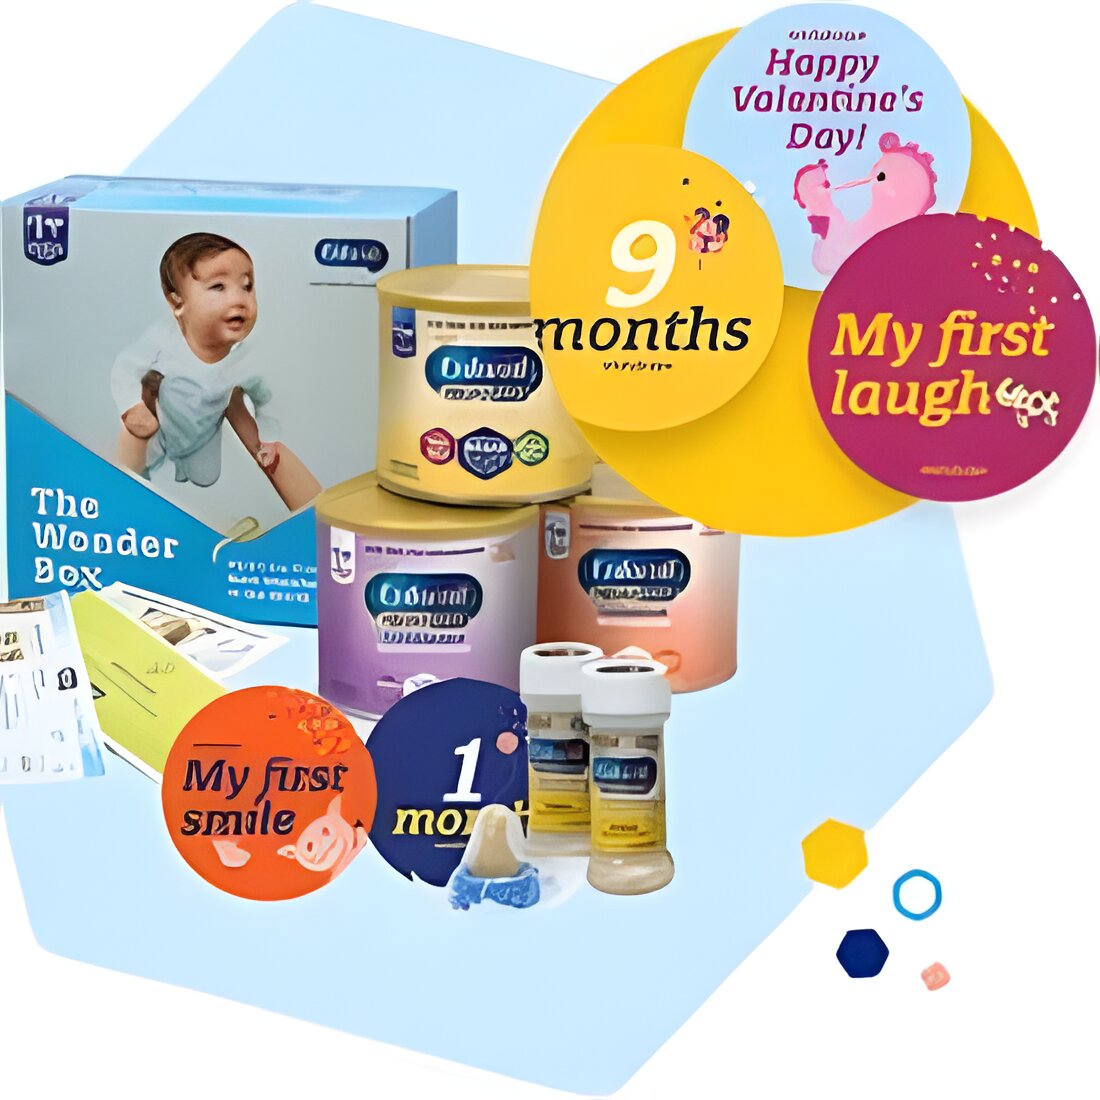 Free Set of Enfamil Belly Badges & Special Gifts